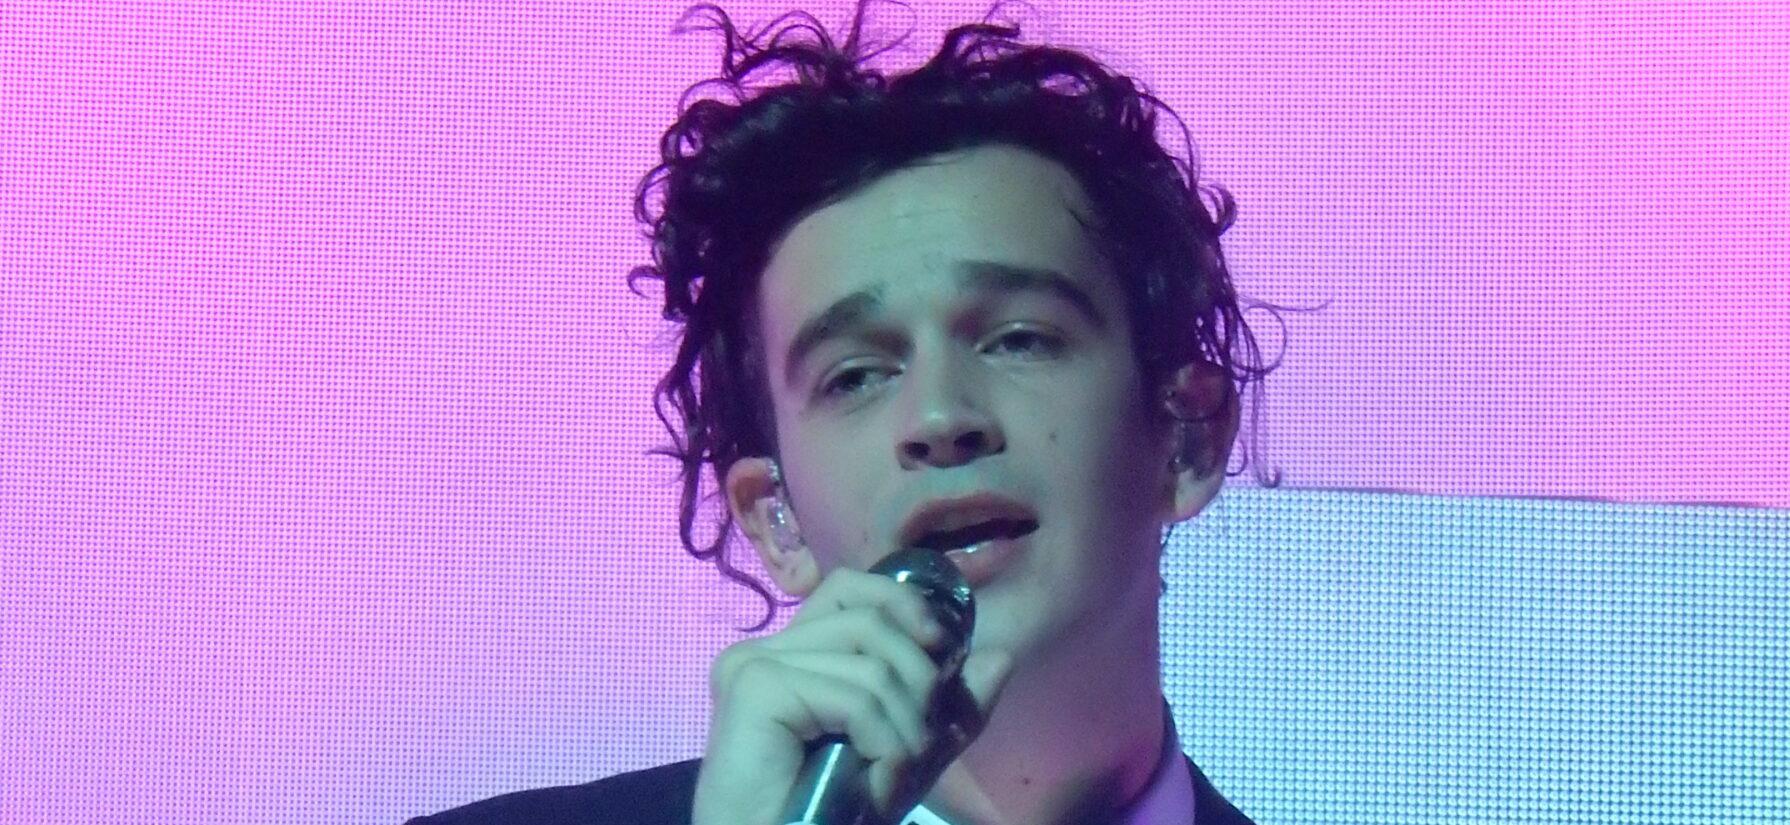 Matty Healy performing with his band The 1975